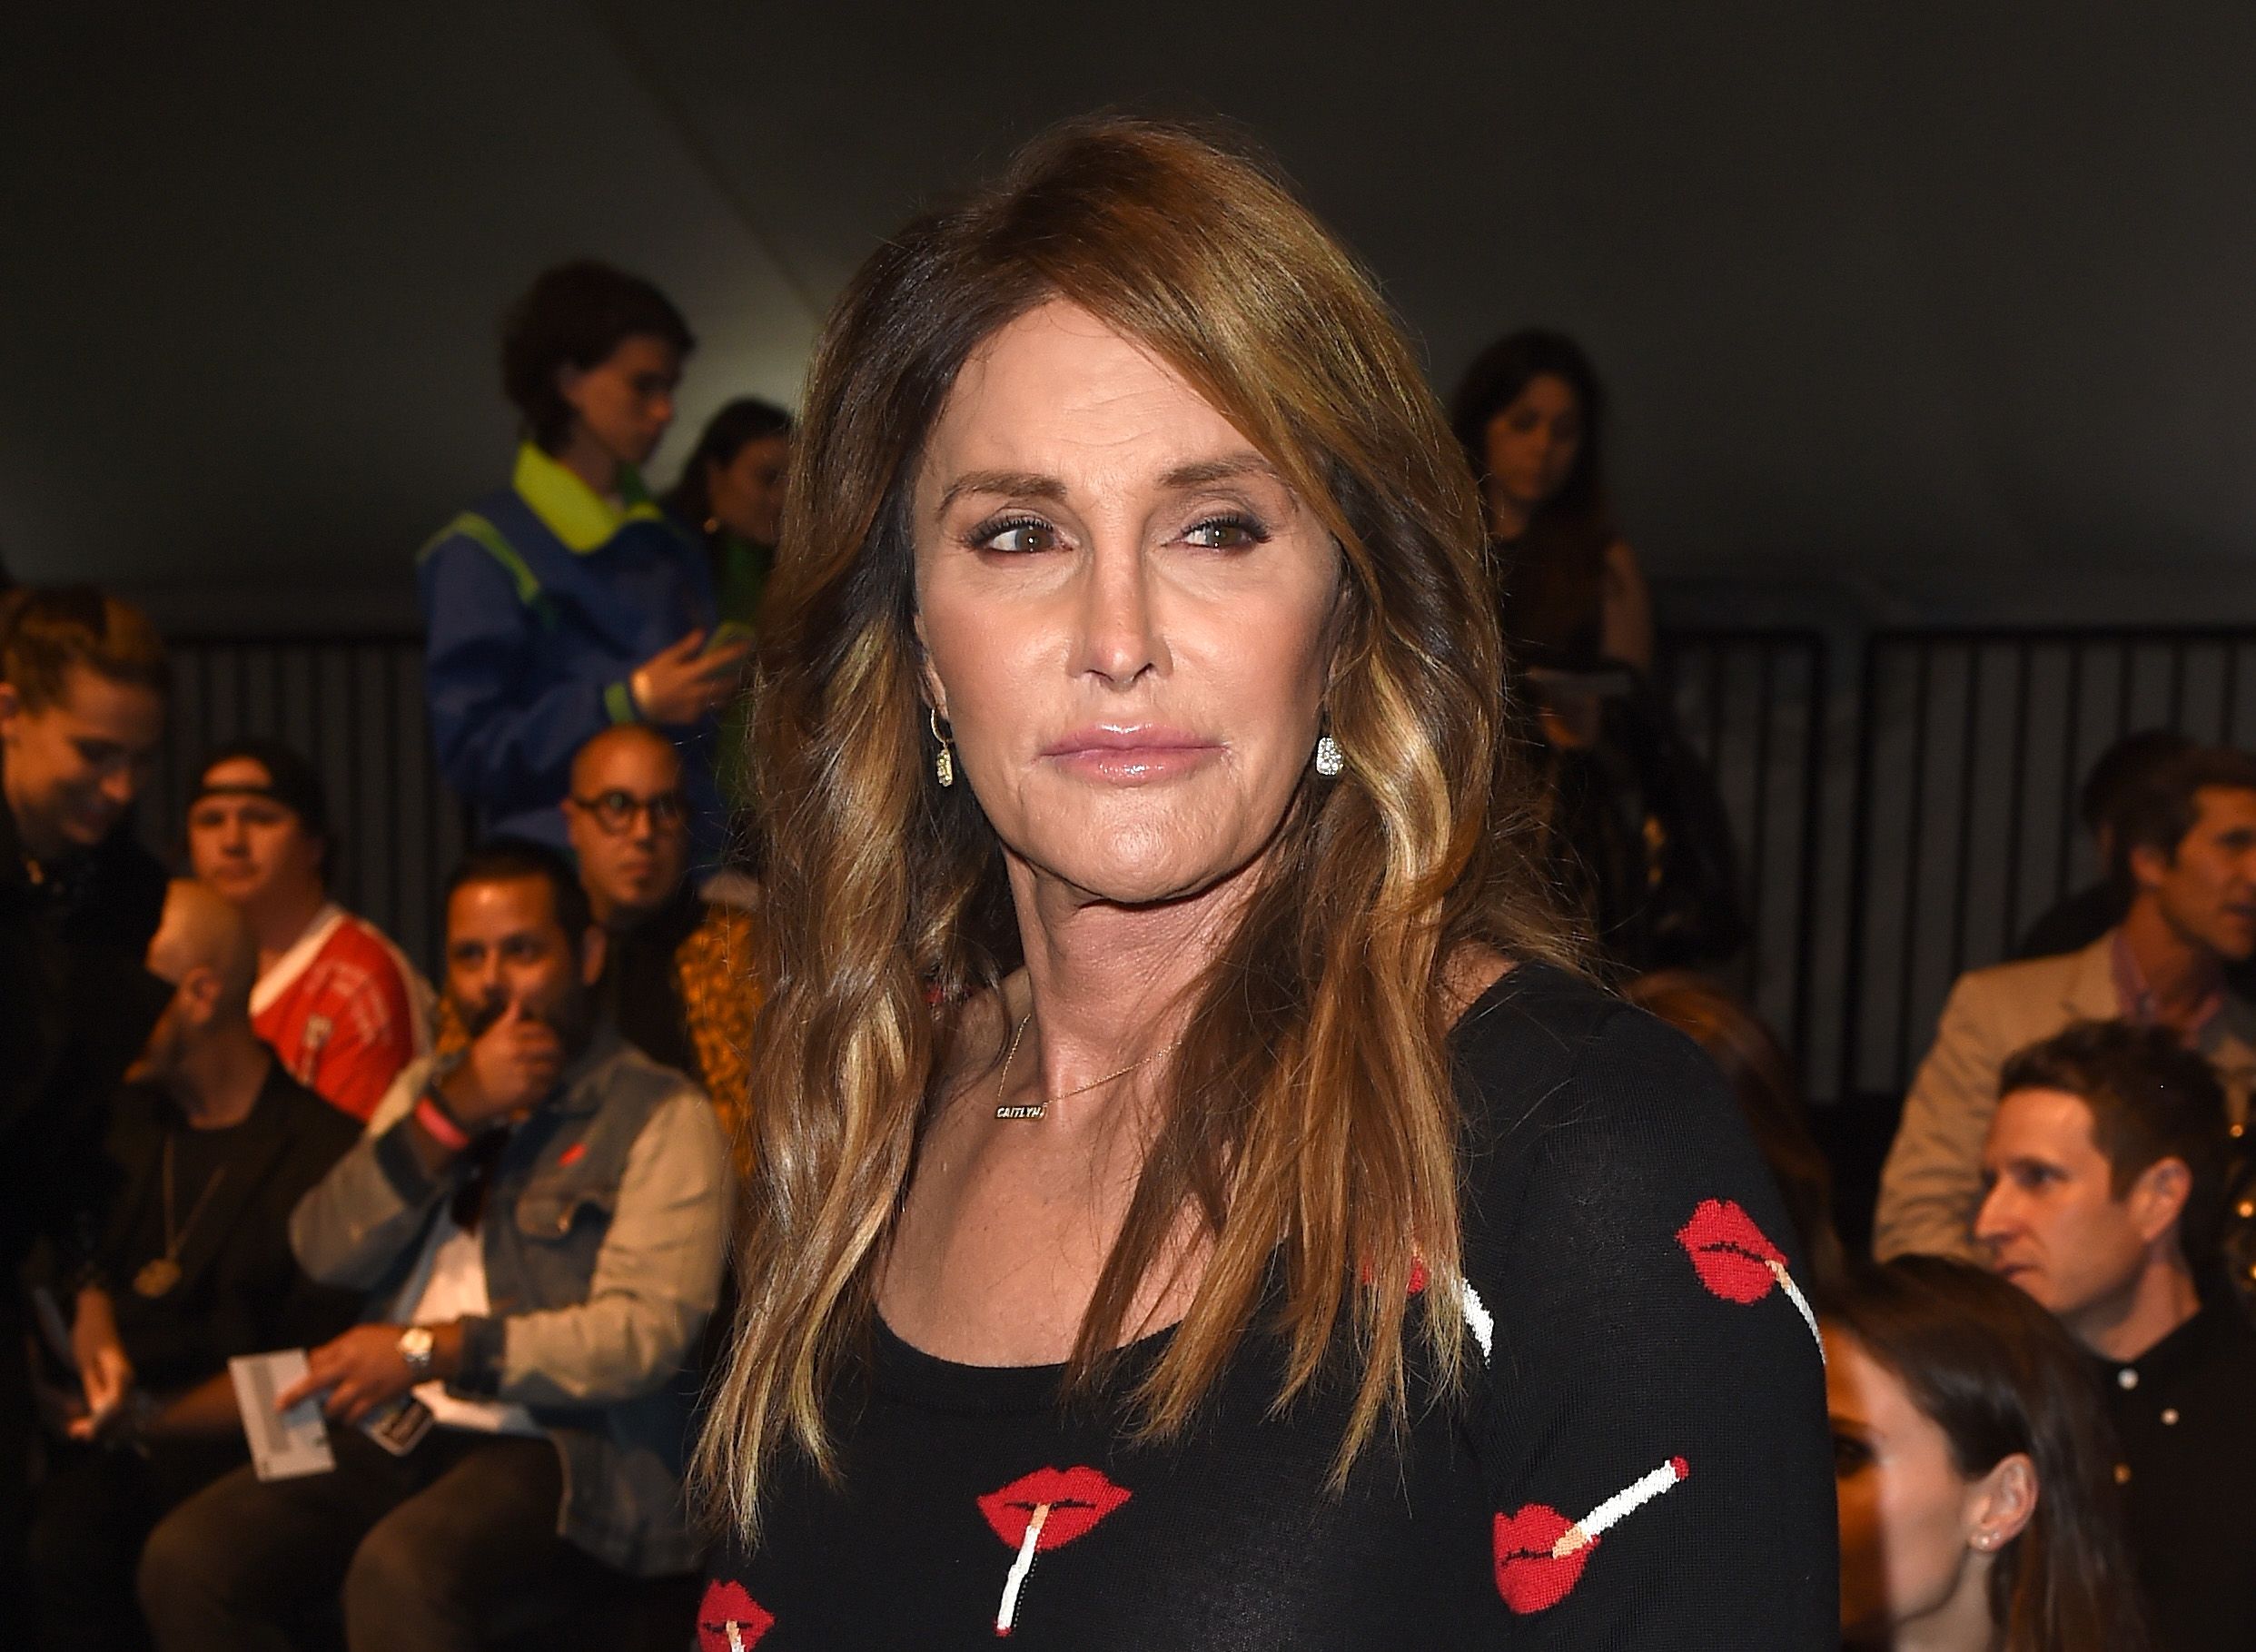 Caitlyn Jenner at the Moschino Spring/Summer 17 Menswear and Women's Resort Collection in 2016, in Los Angeles | Source: Getty Images